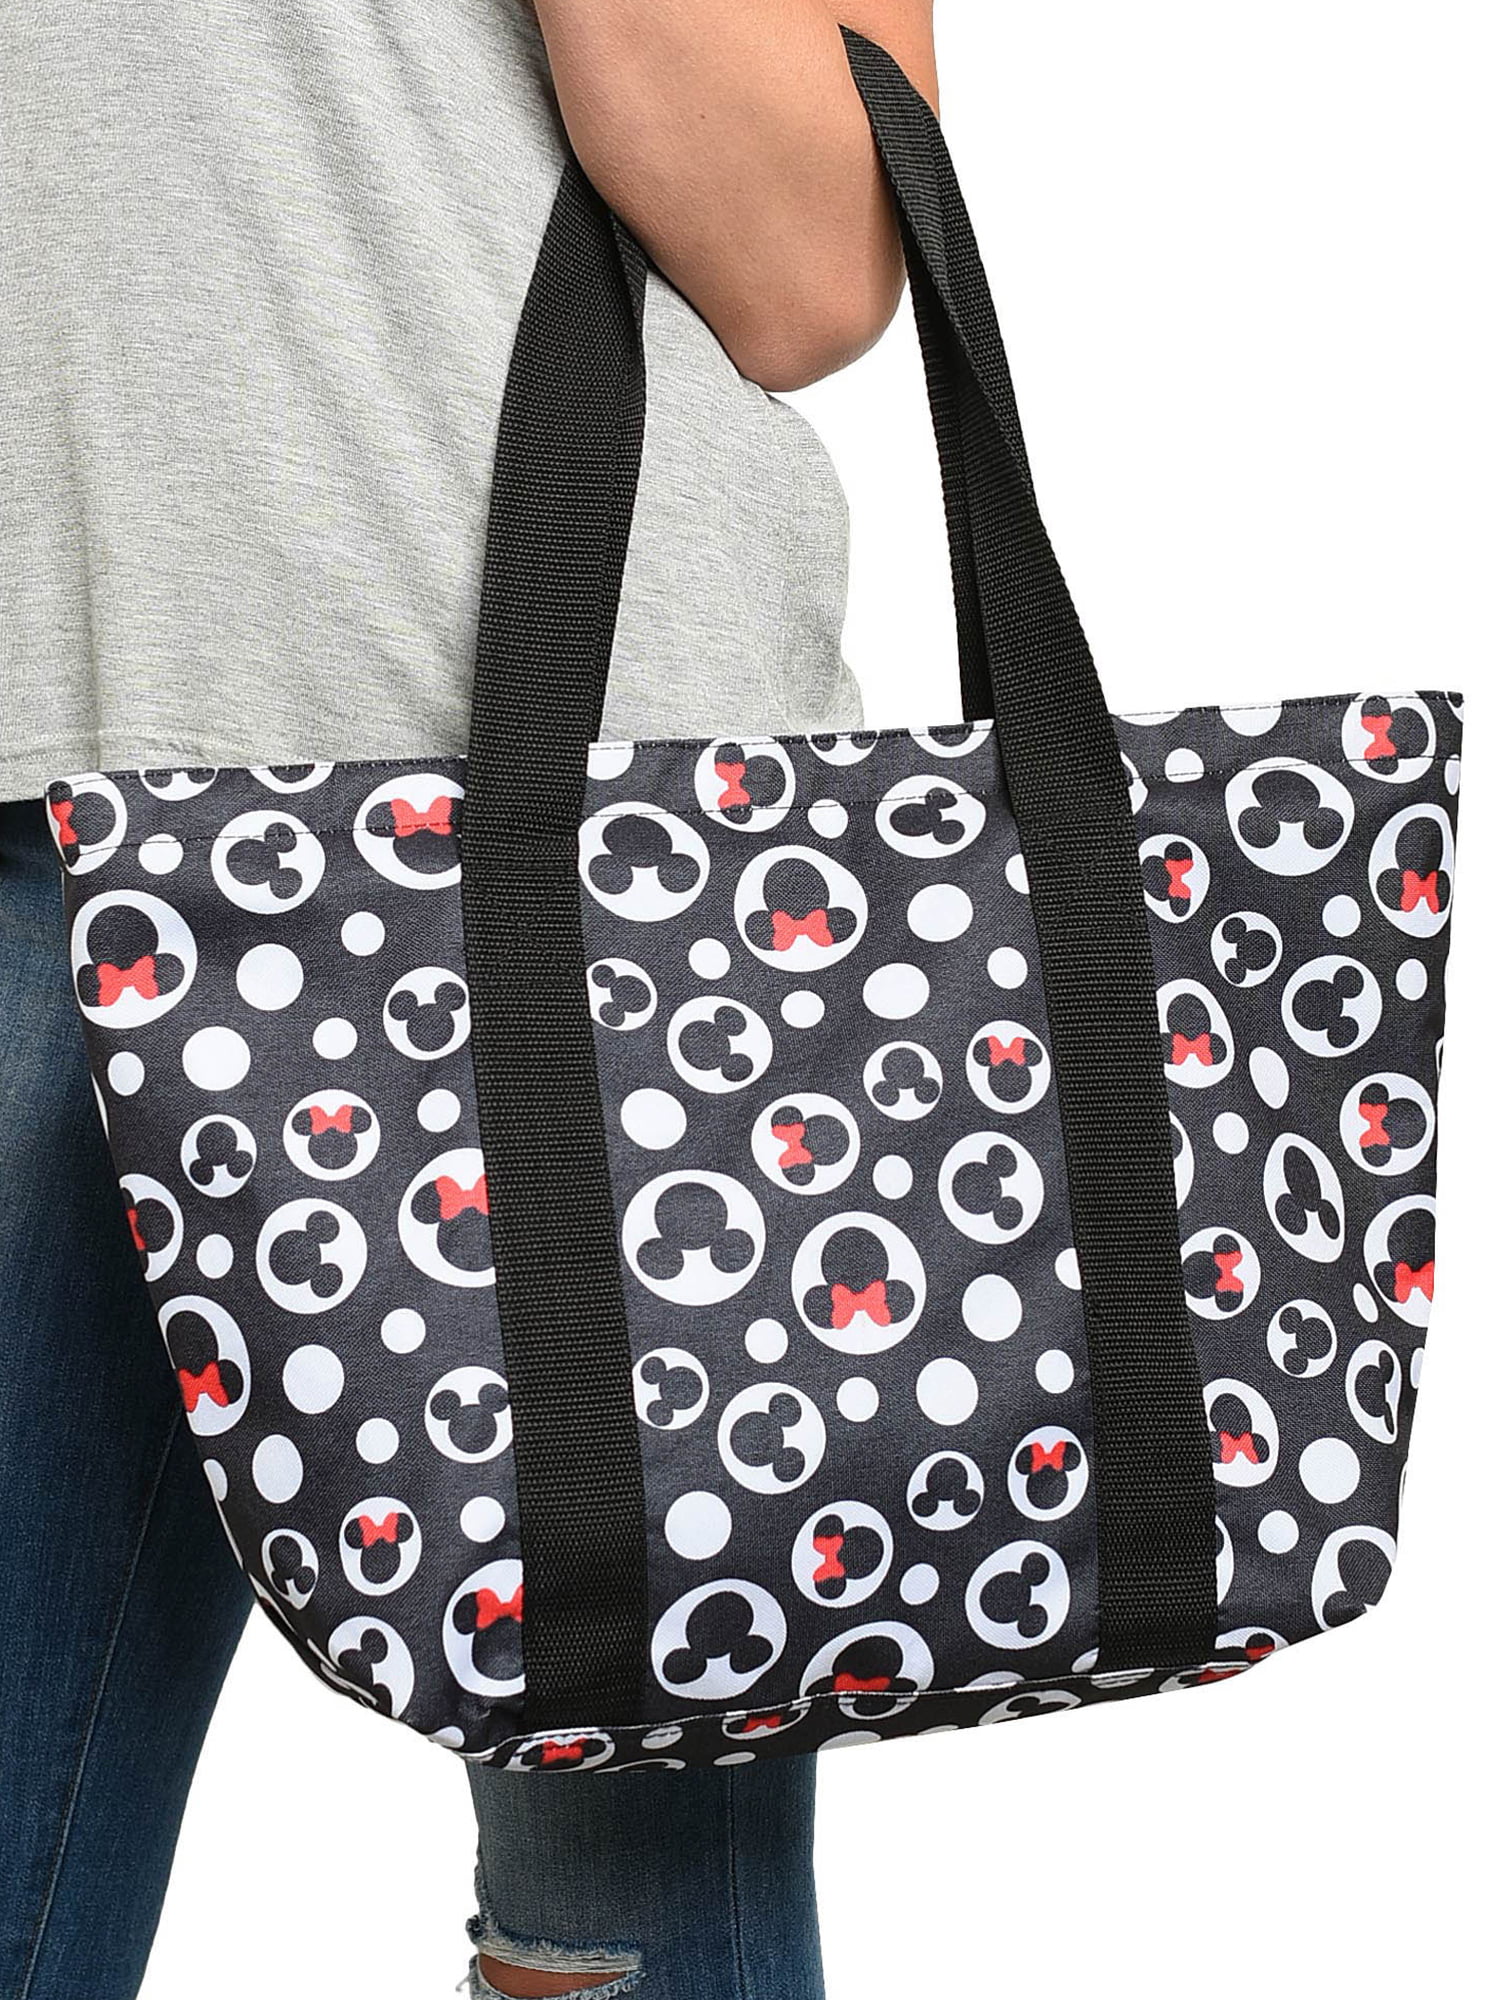 Kode : F6645 ILP Mickey Tote Bag Rp. 140.000 Warna : Black Only